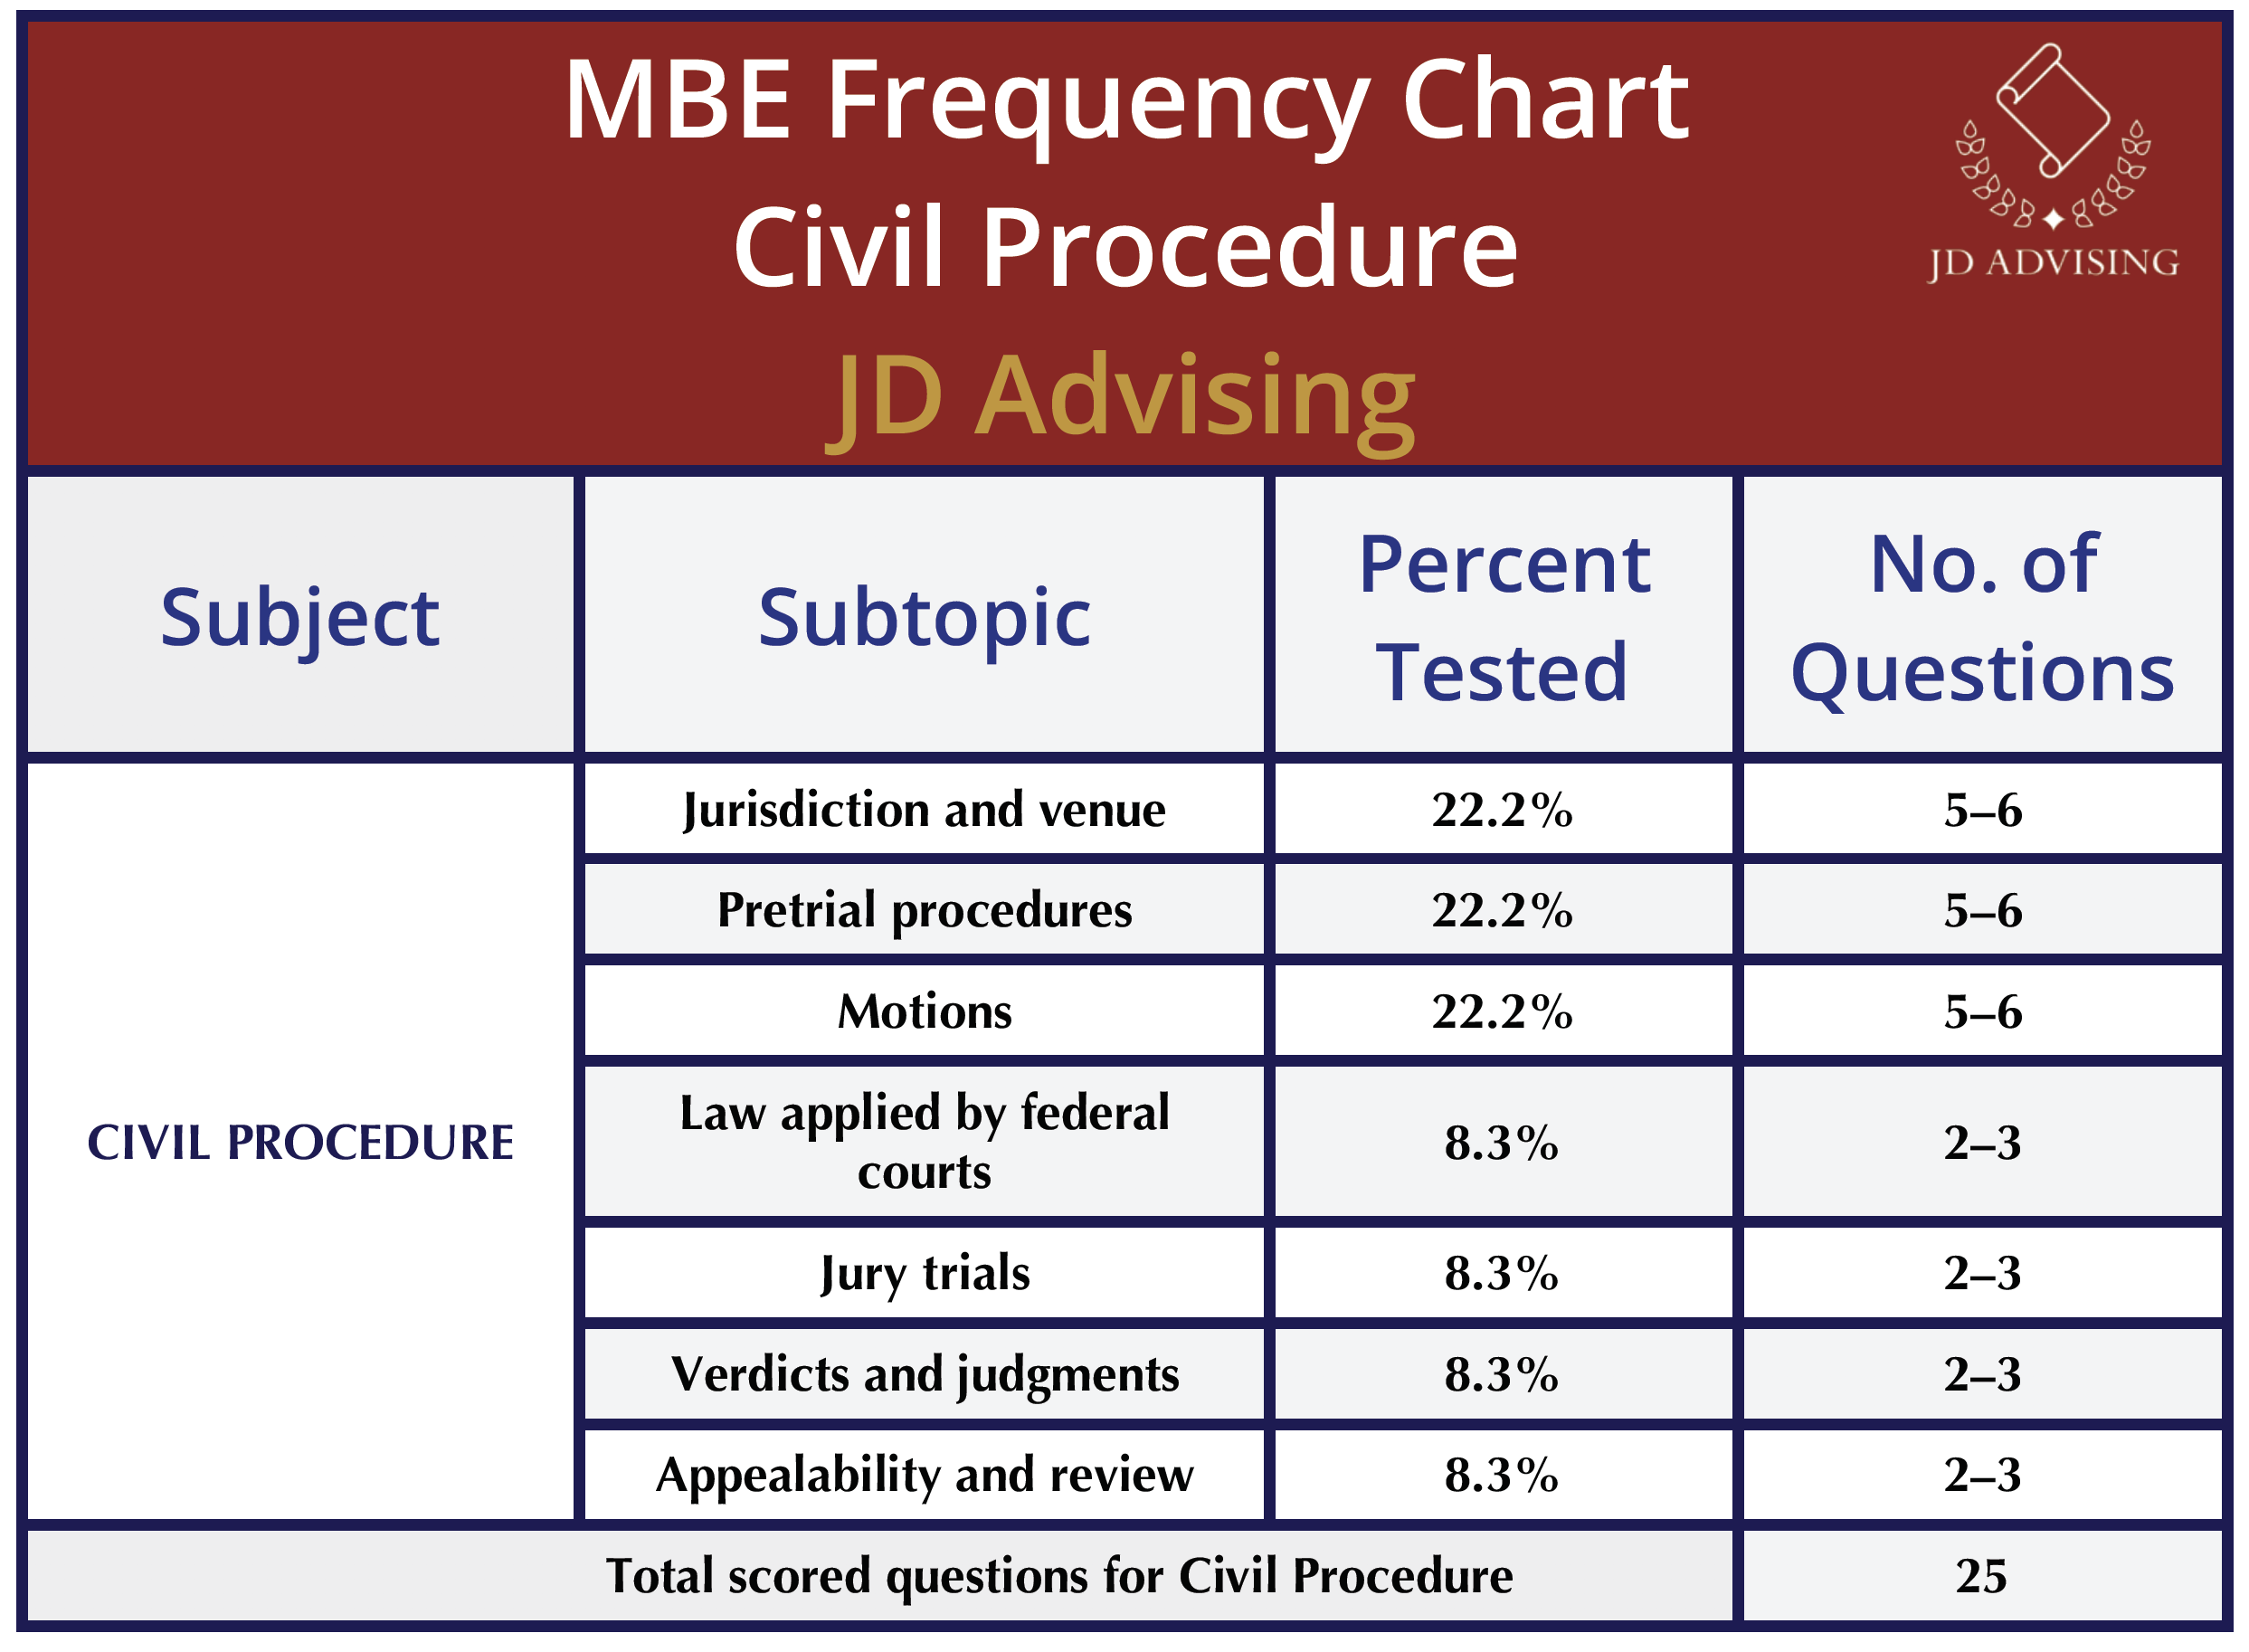 Civil Procedure MBE frequency chart